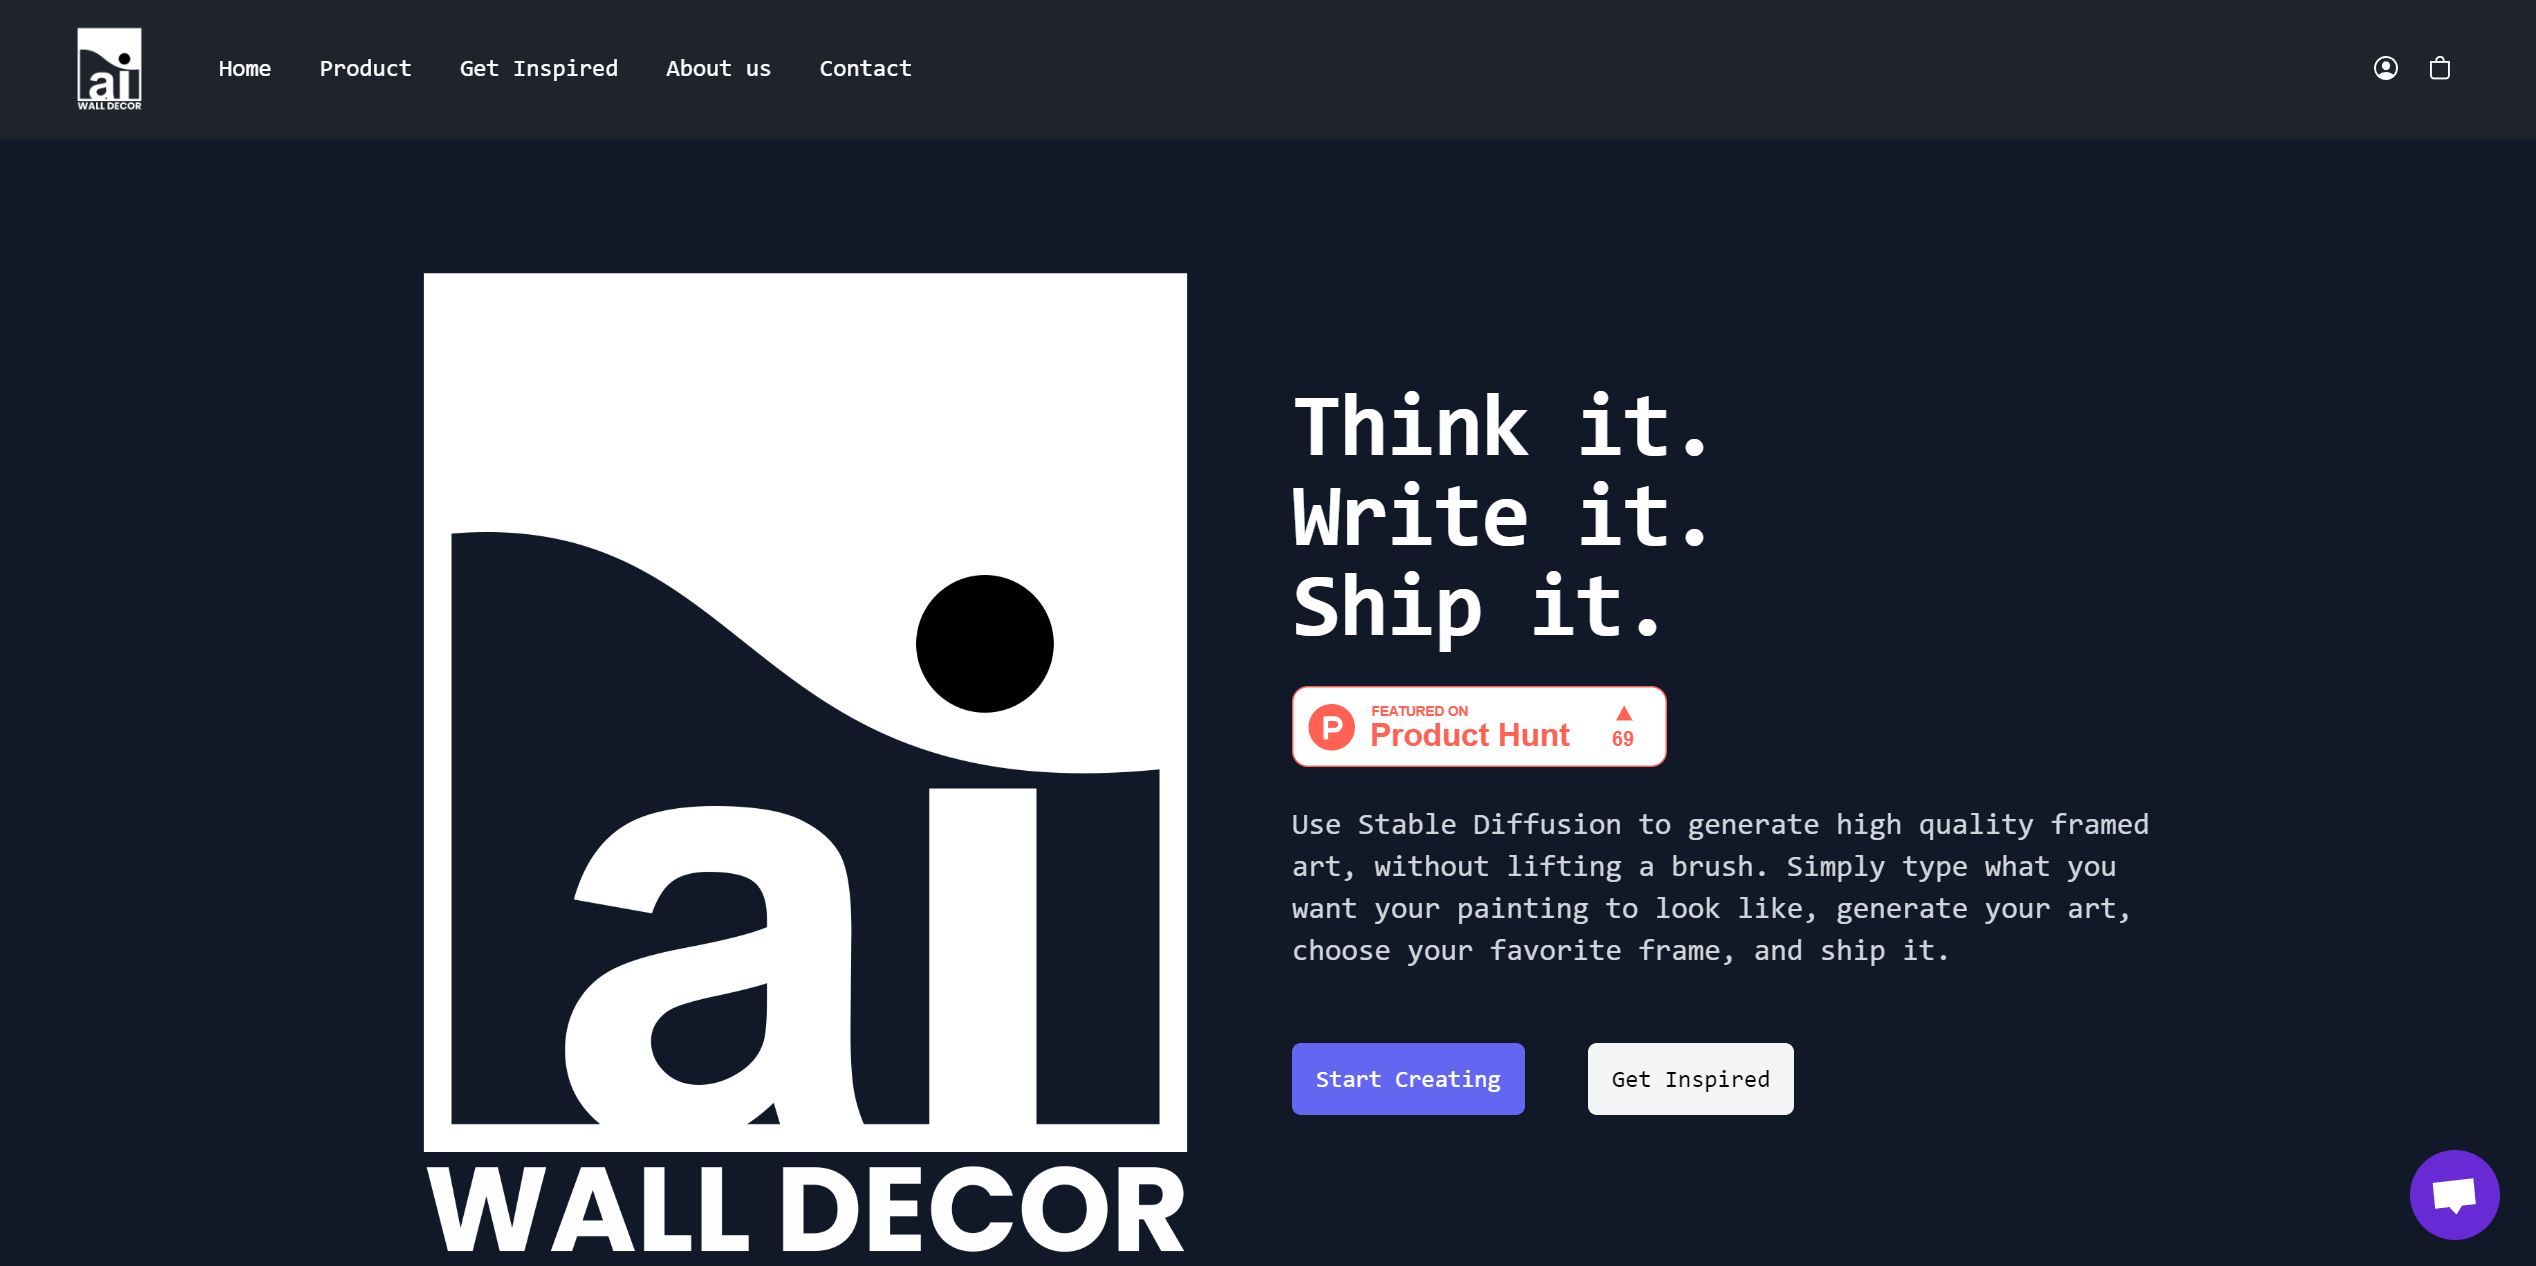 AI Wall DecorAI Wall Decor enables users to create framed